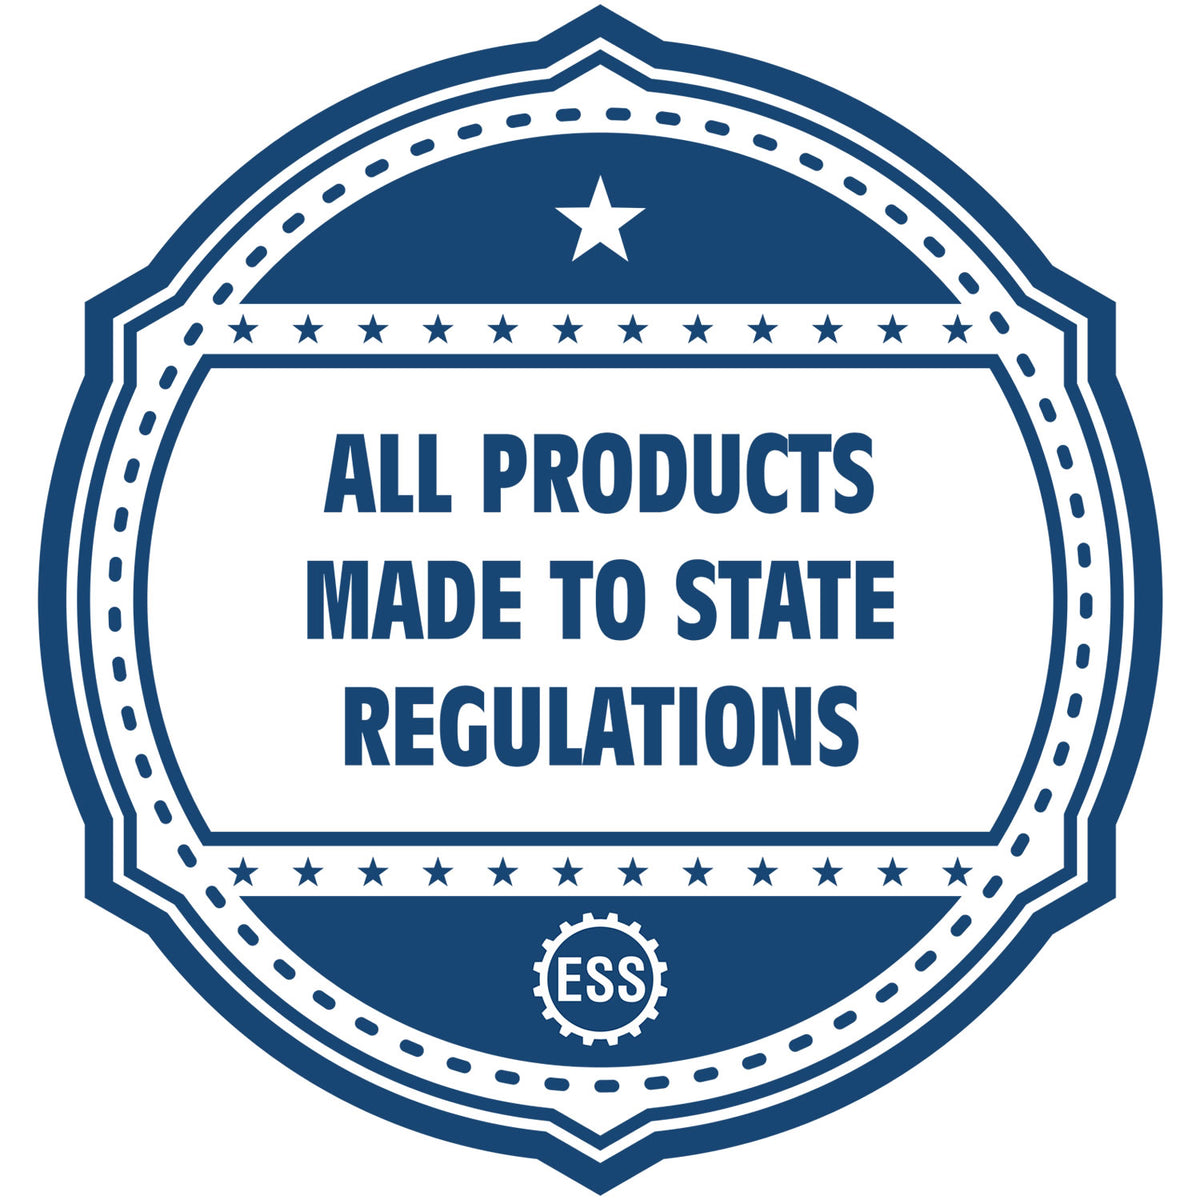 An icon or badge element for the Soft Mississippi Professional Engineer Seal showing that this product is made in compliance with state regulations.